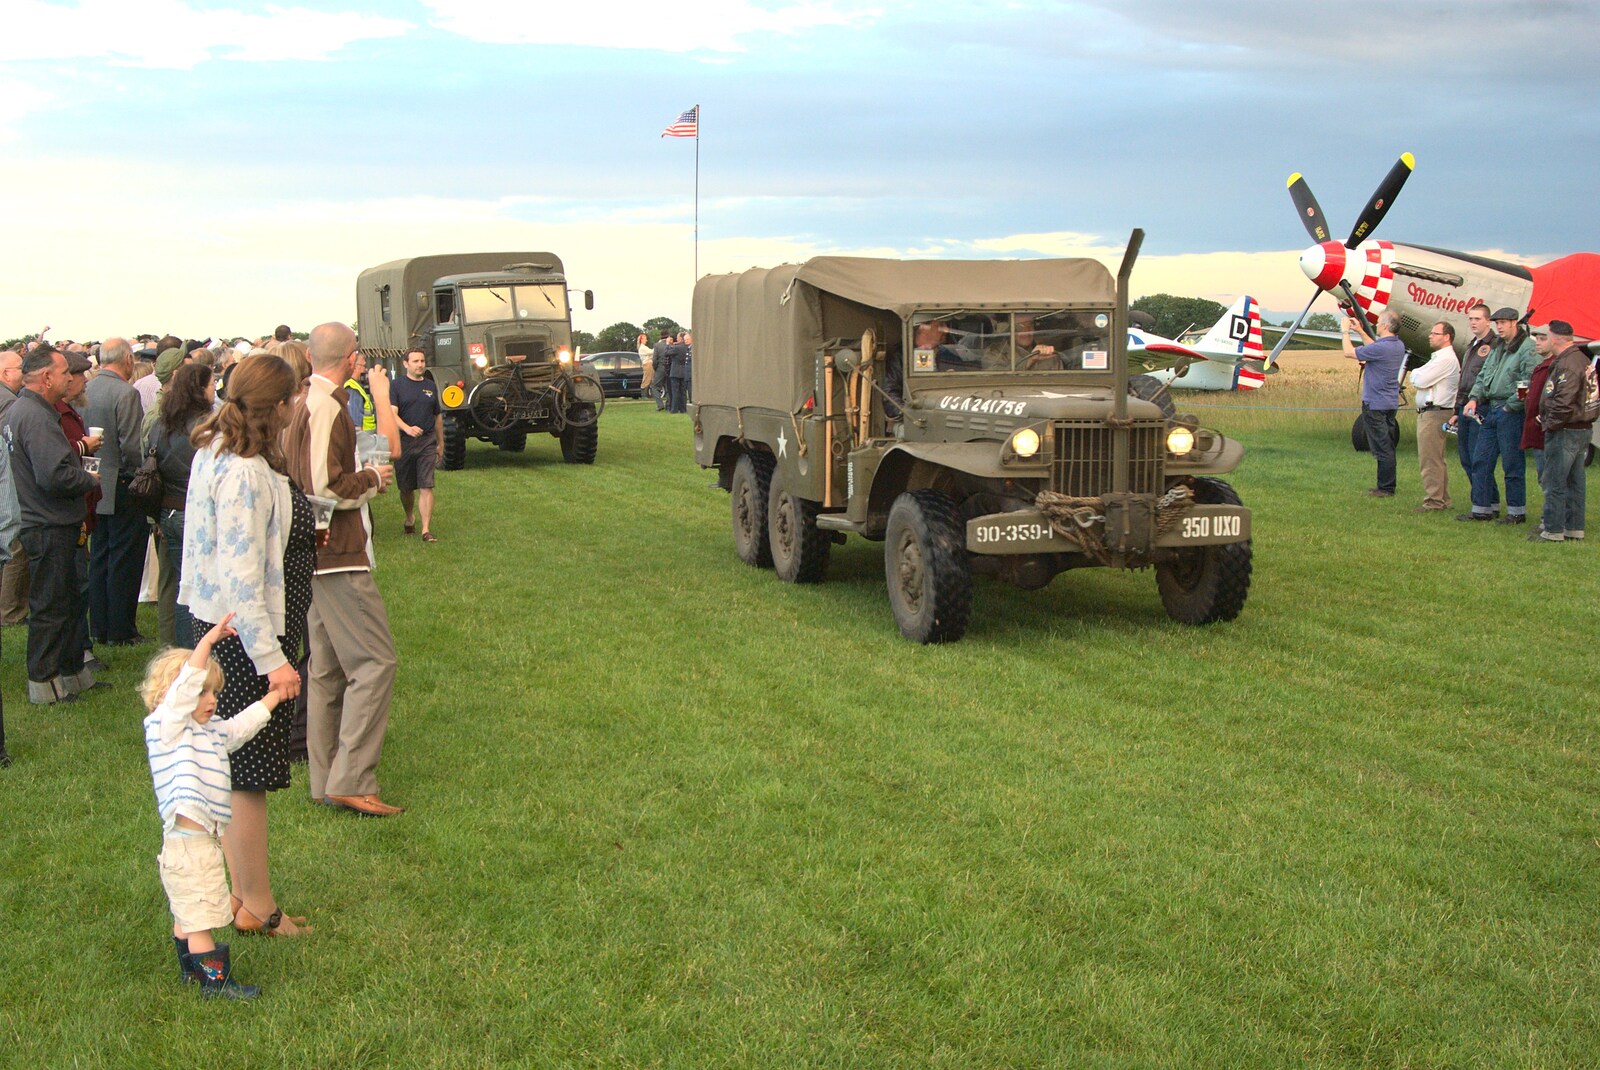 Some Army trucks appear from Maurice's Mustang Hangar Dance, Hardwick Airfield, Norfolk - 16th July 2011